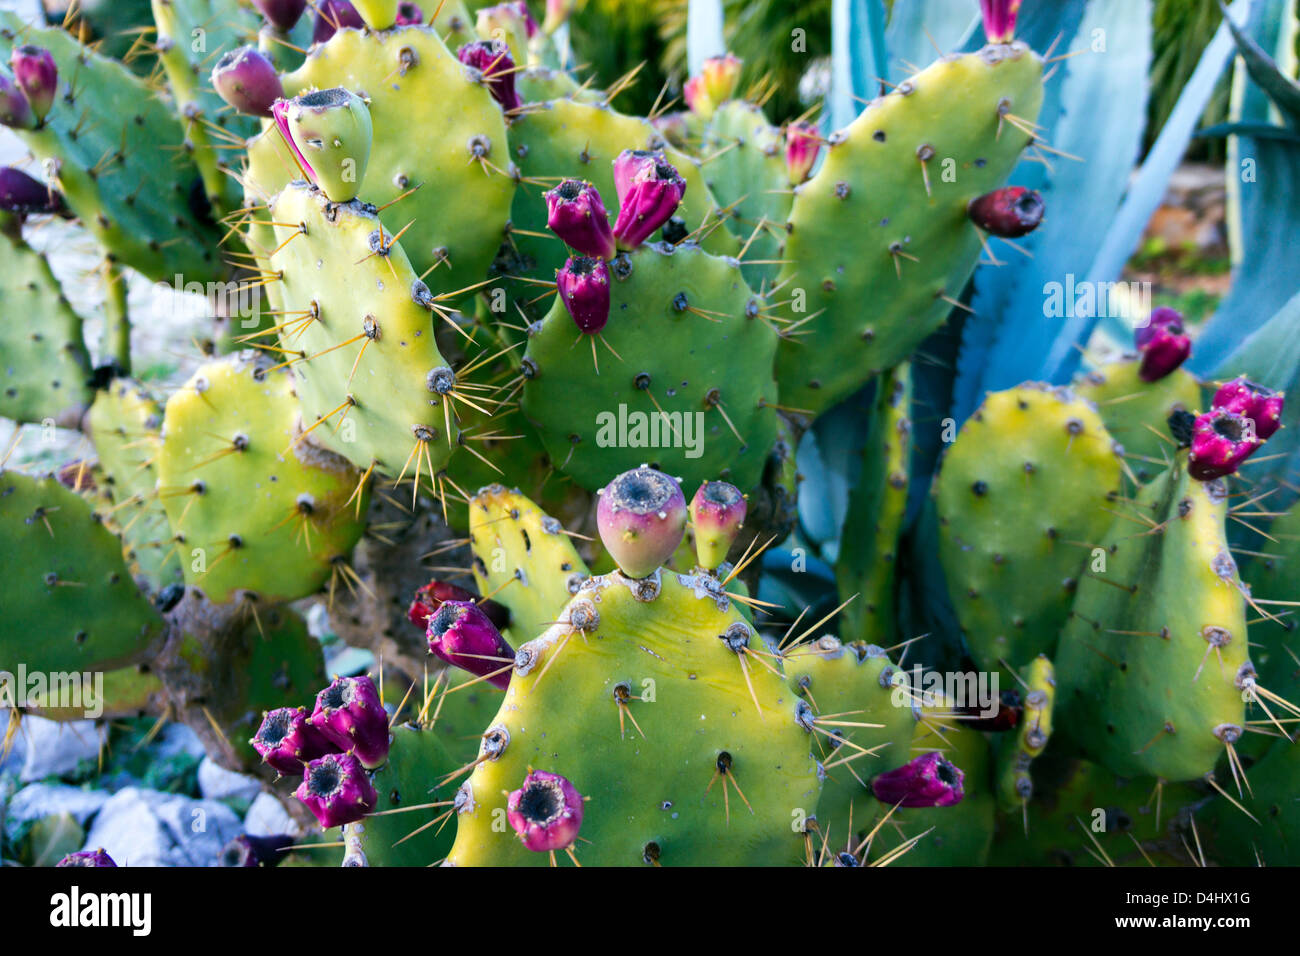 Prickly Pear Cactus With Spines And Purple Fruit Stock Photo Alamy